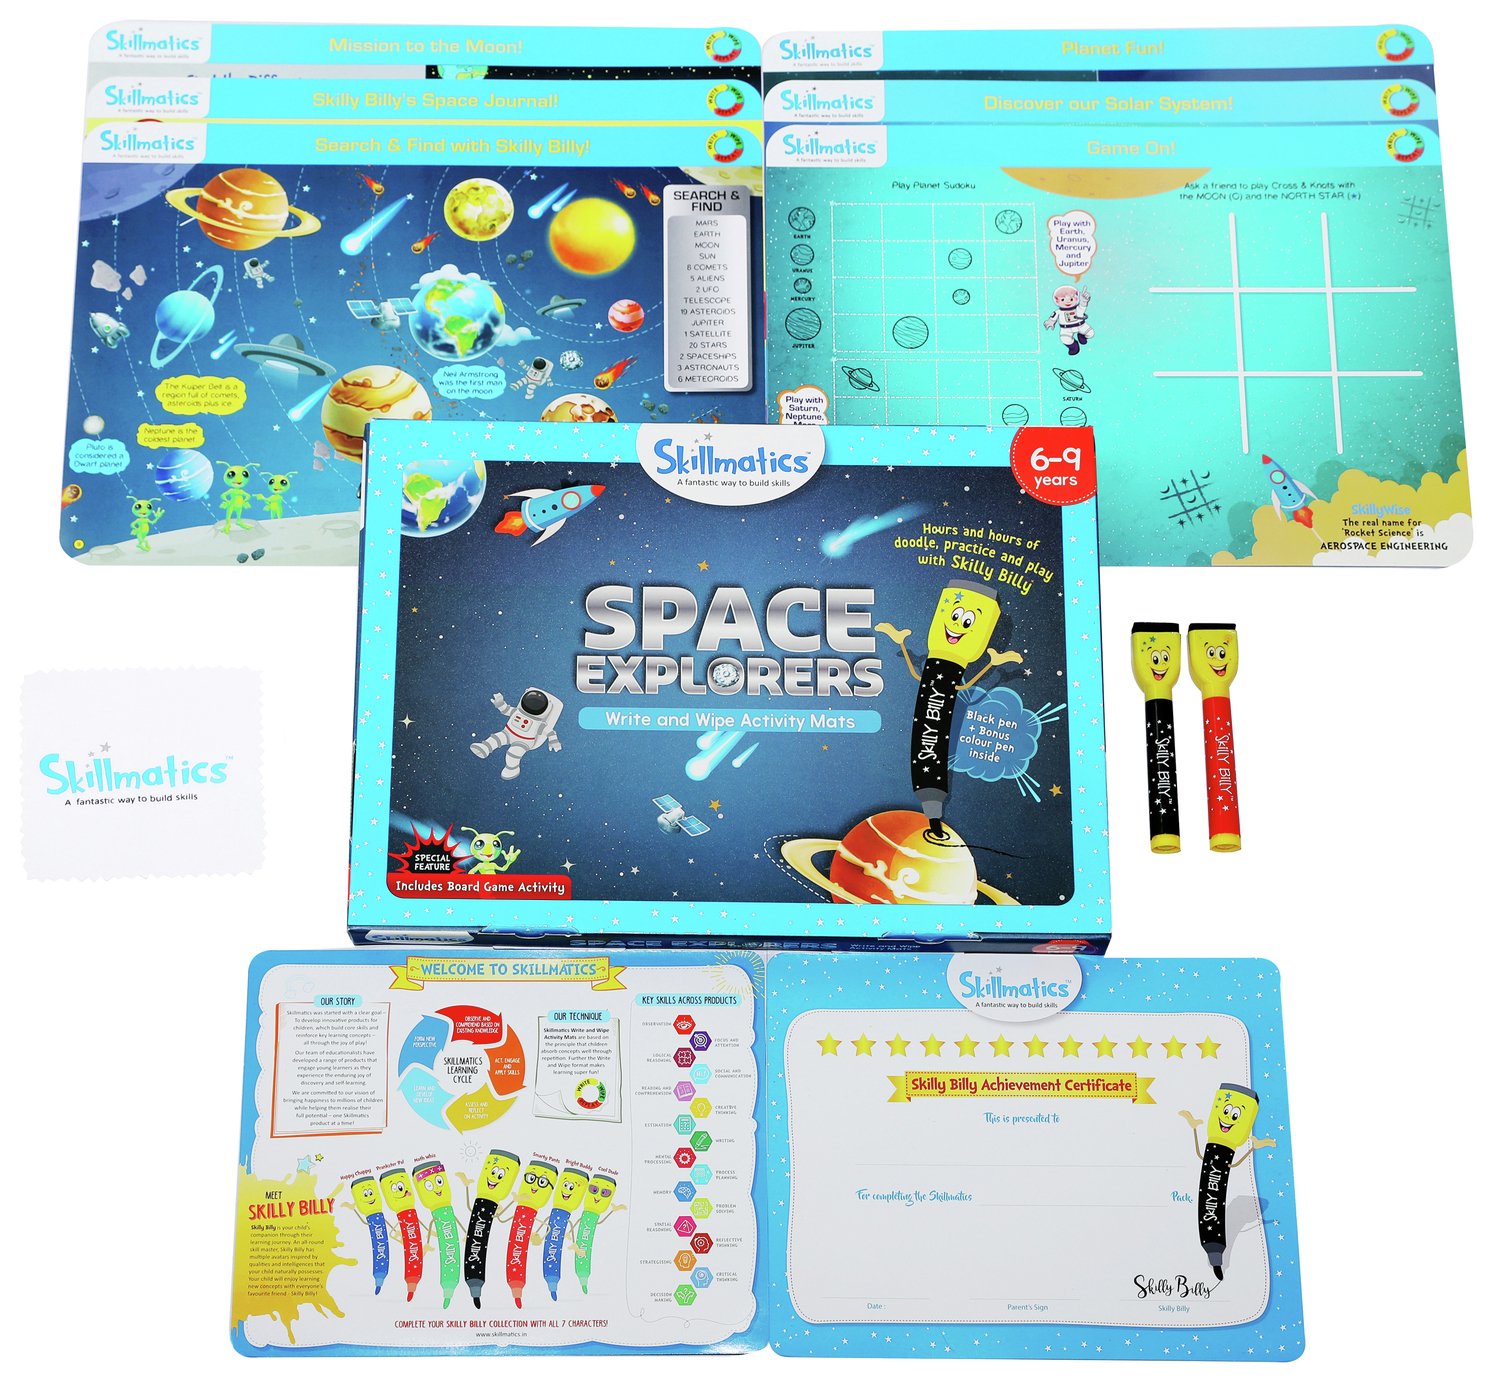 Skillmatics Space Explorers Learning Set review